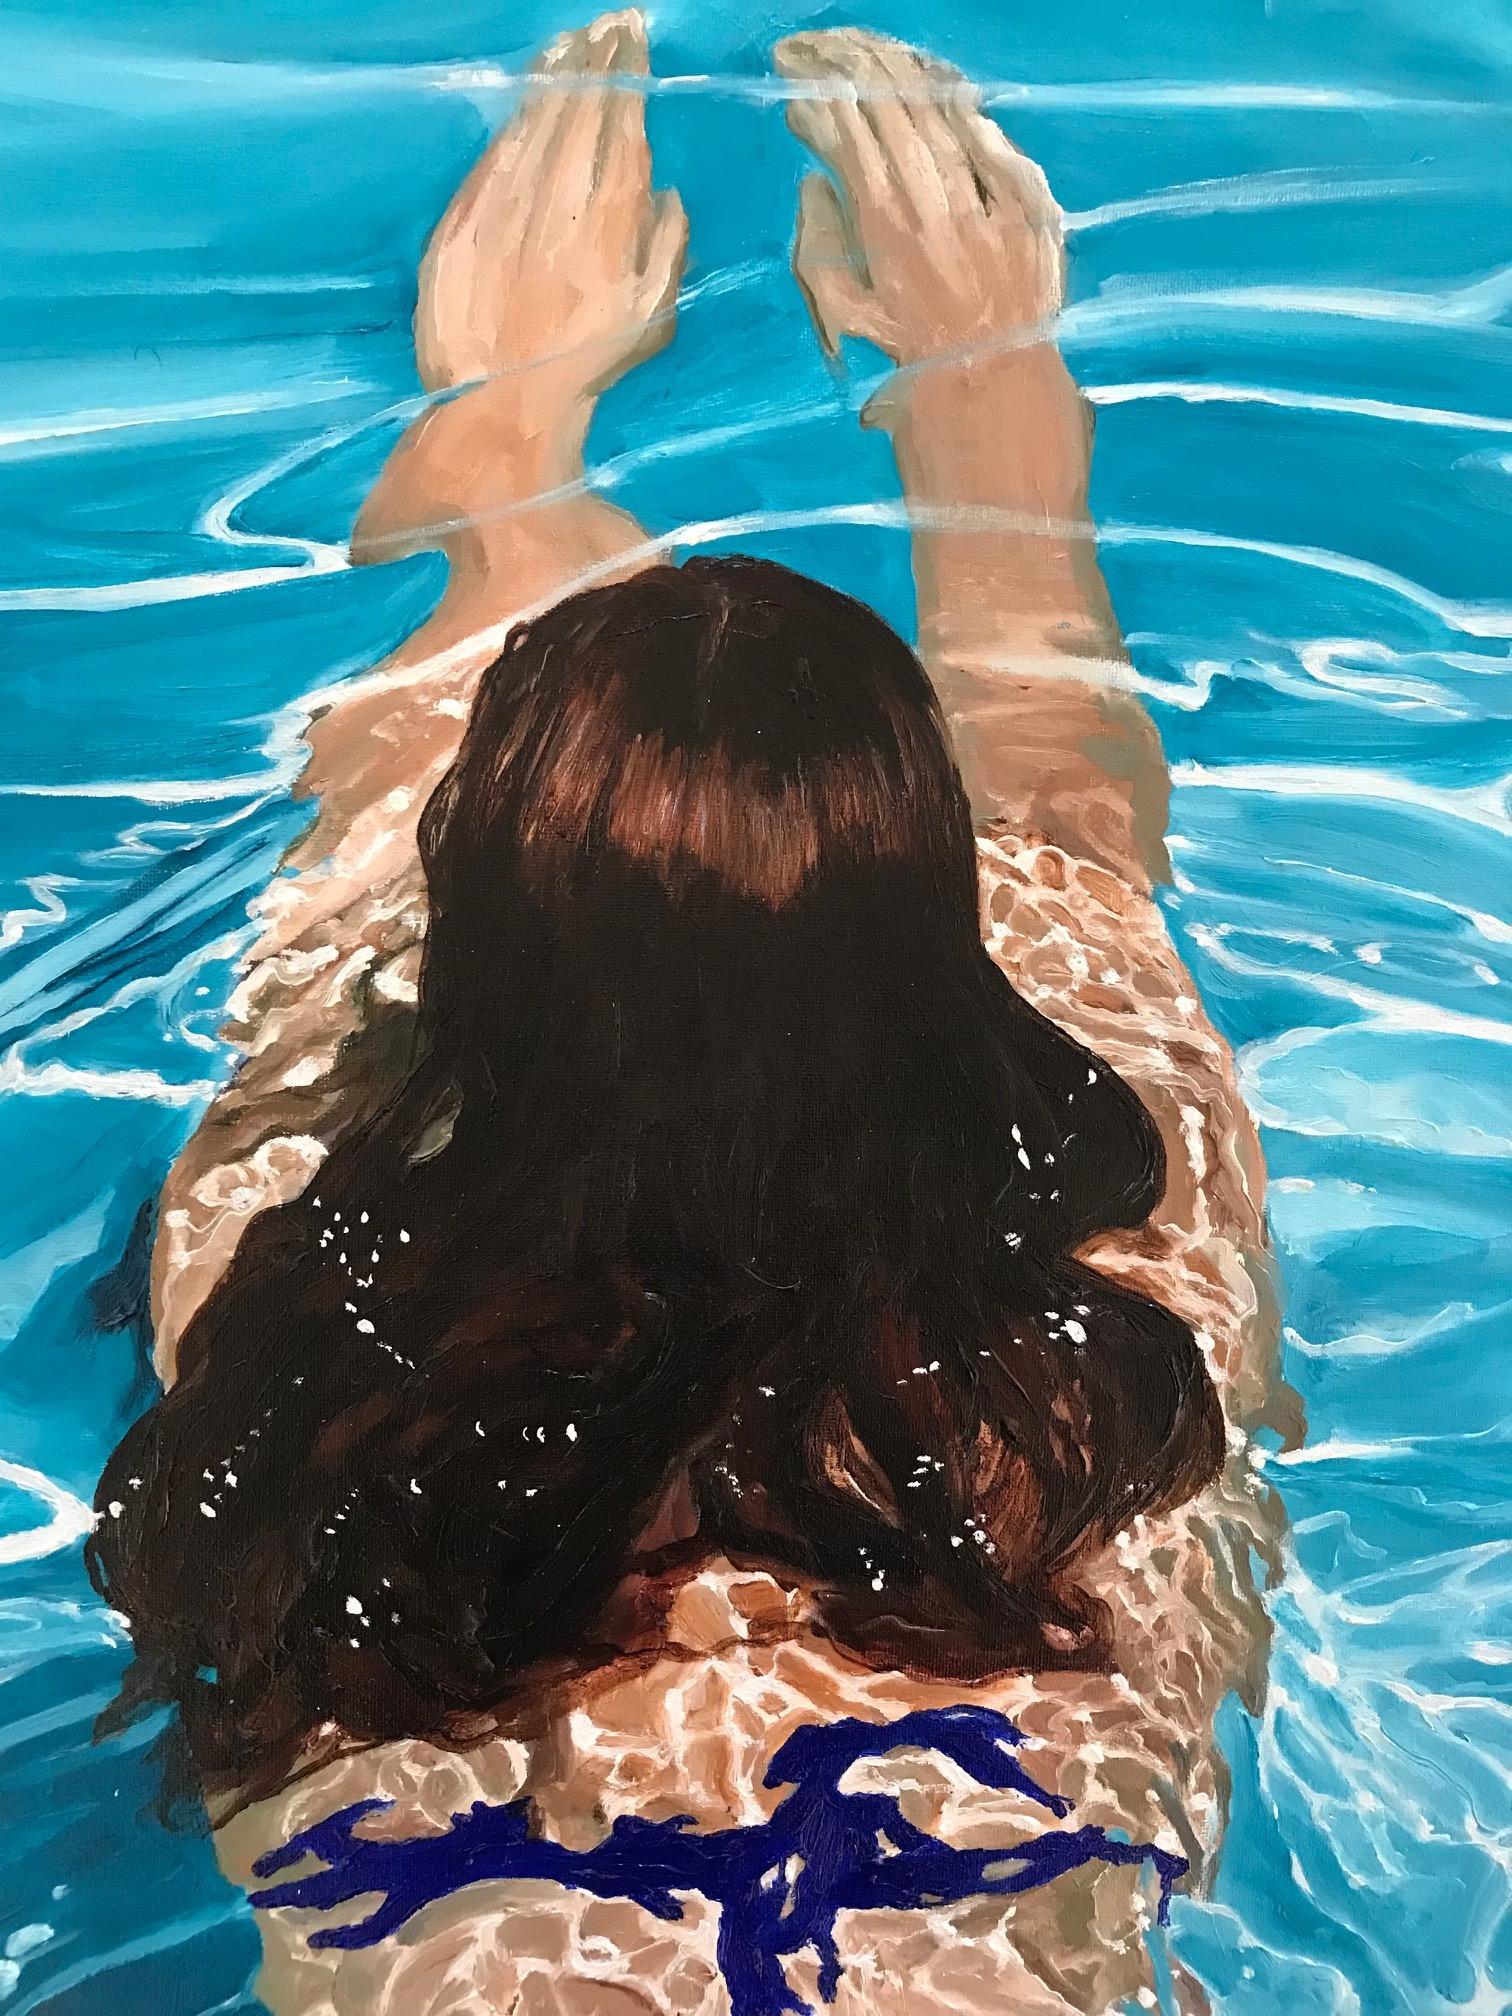 Amy Devlin portrays people, animals, or nature in her works. But what really matters to her is light and water, which she wants to capture in the form of a physical memory. By following her passion for paint, she tries to represent reality and